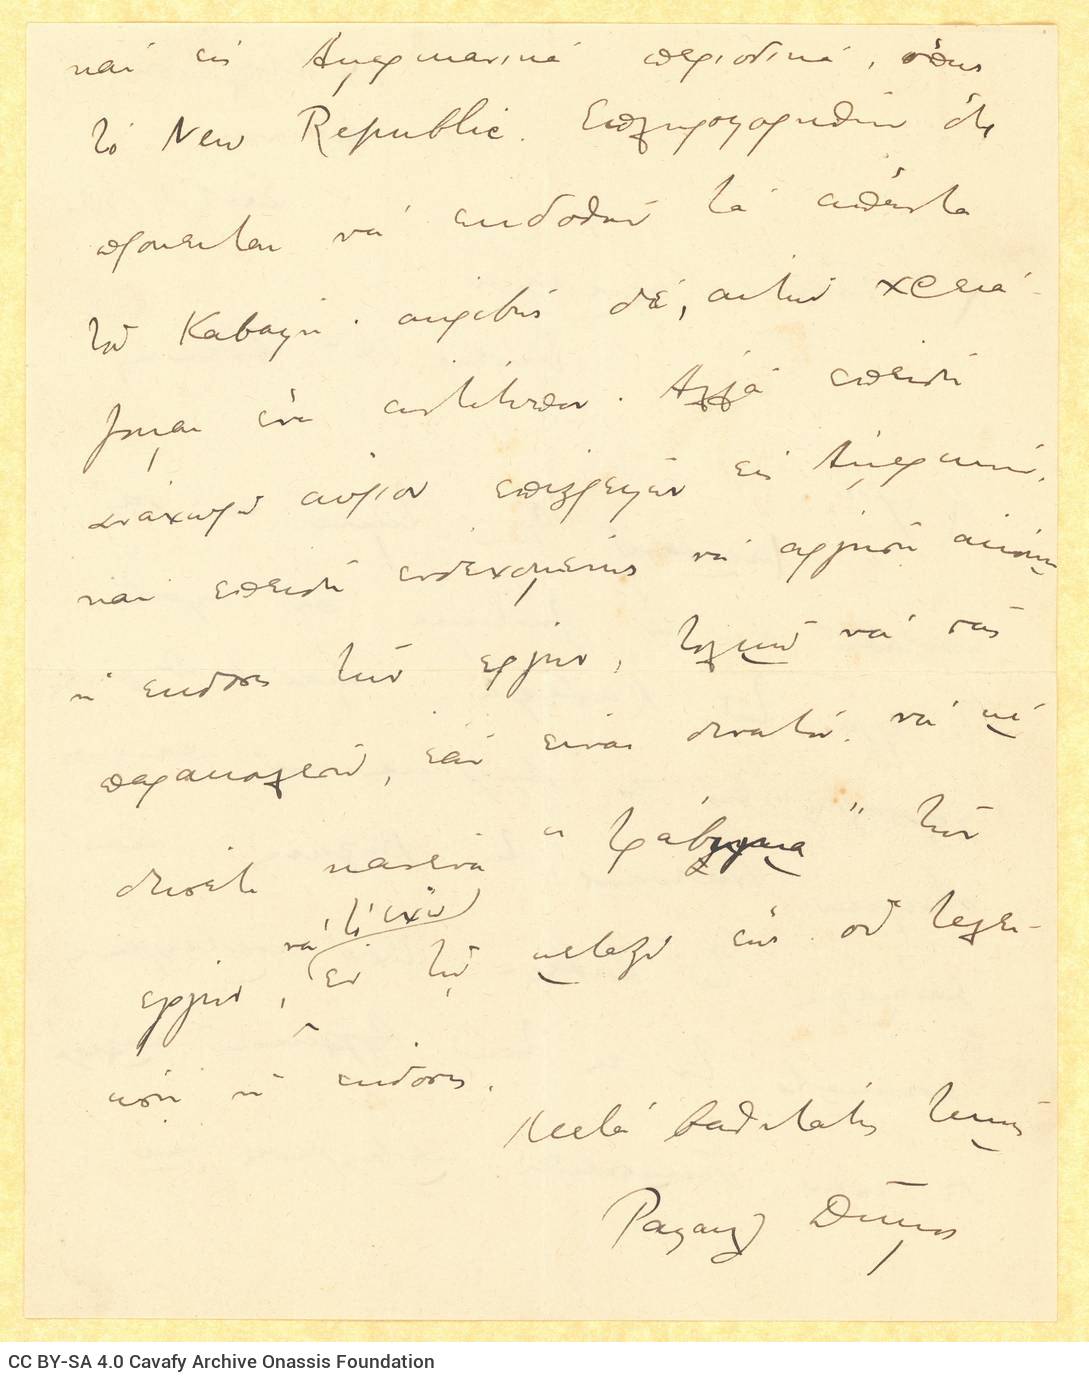 Handwritten letter by Raphael Demos to Takis Kalmouchos on both sides of a sheet. The sender, professor of philosophy at Harv